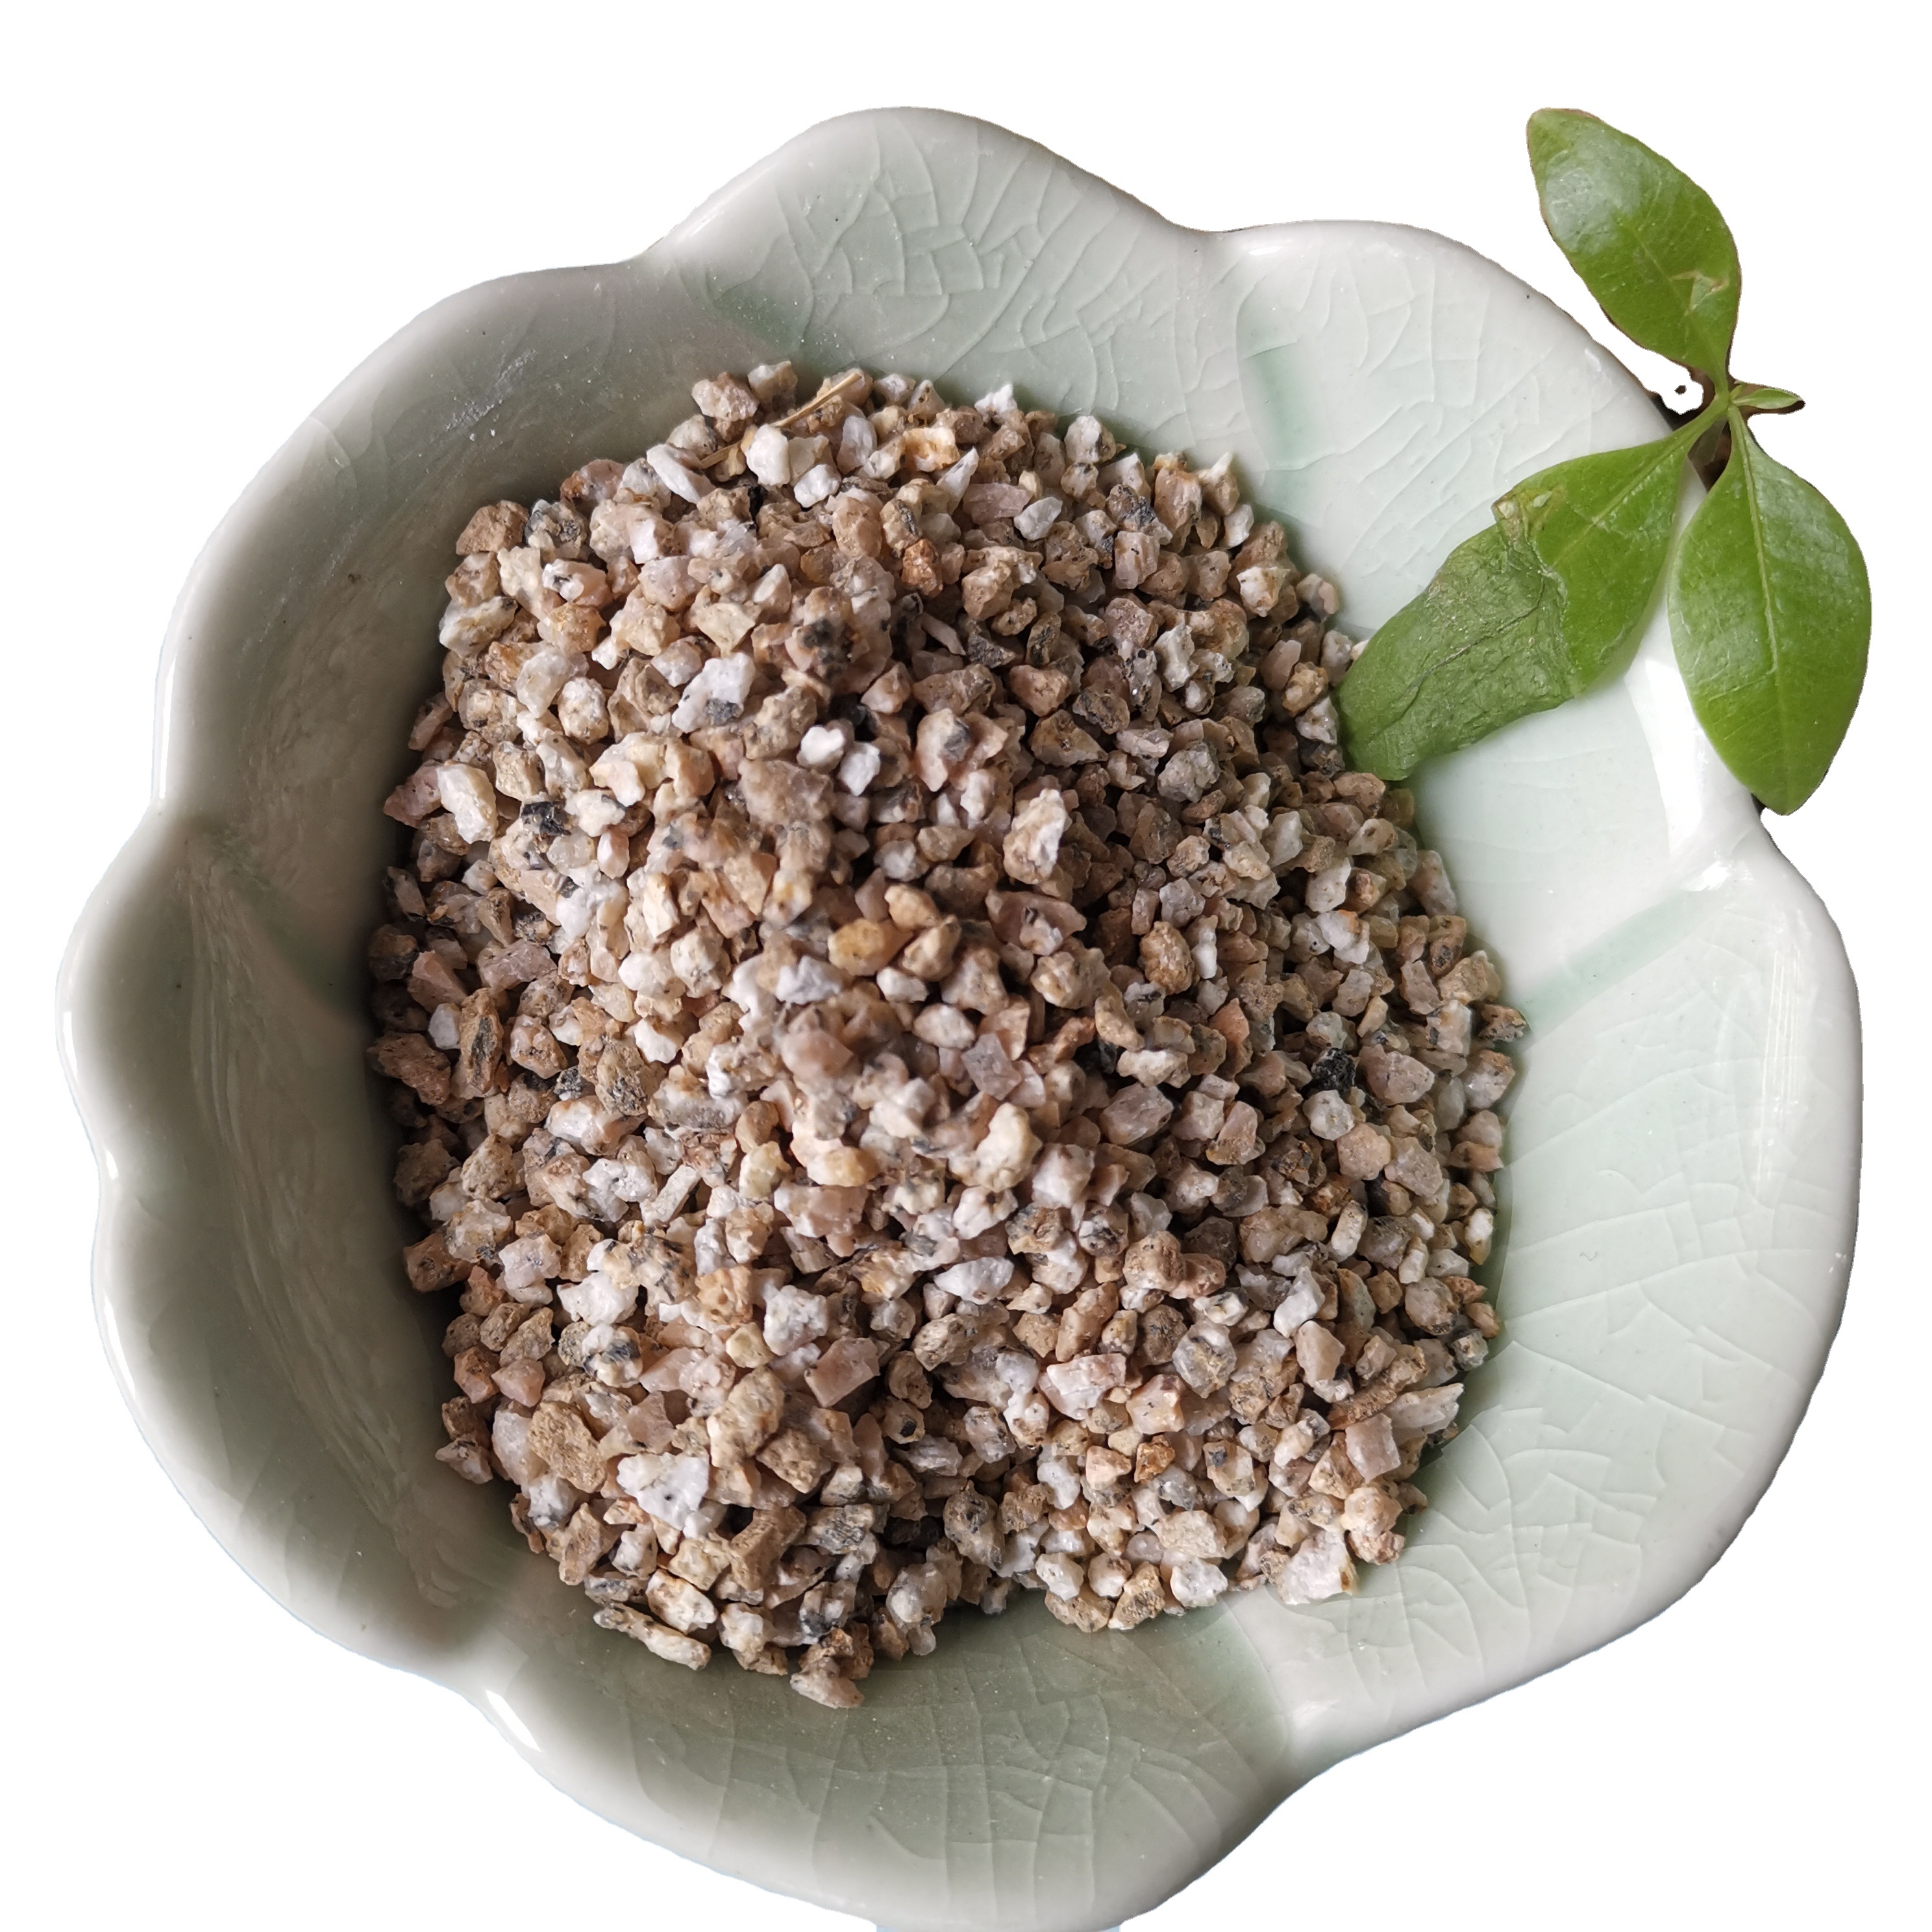 Fine Grade Horticultural Vermiculite for Indoor Plants and Gardening